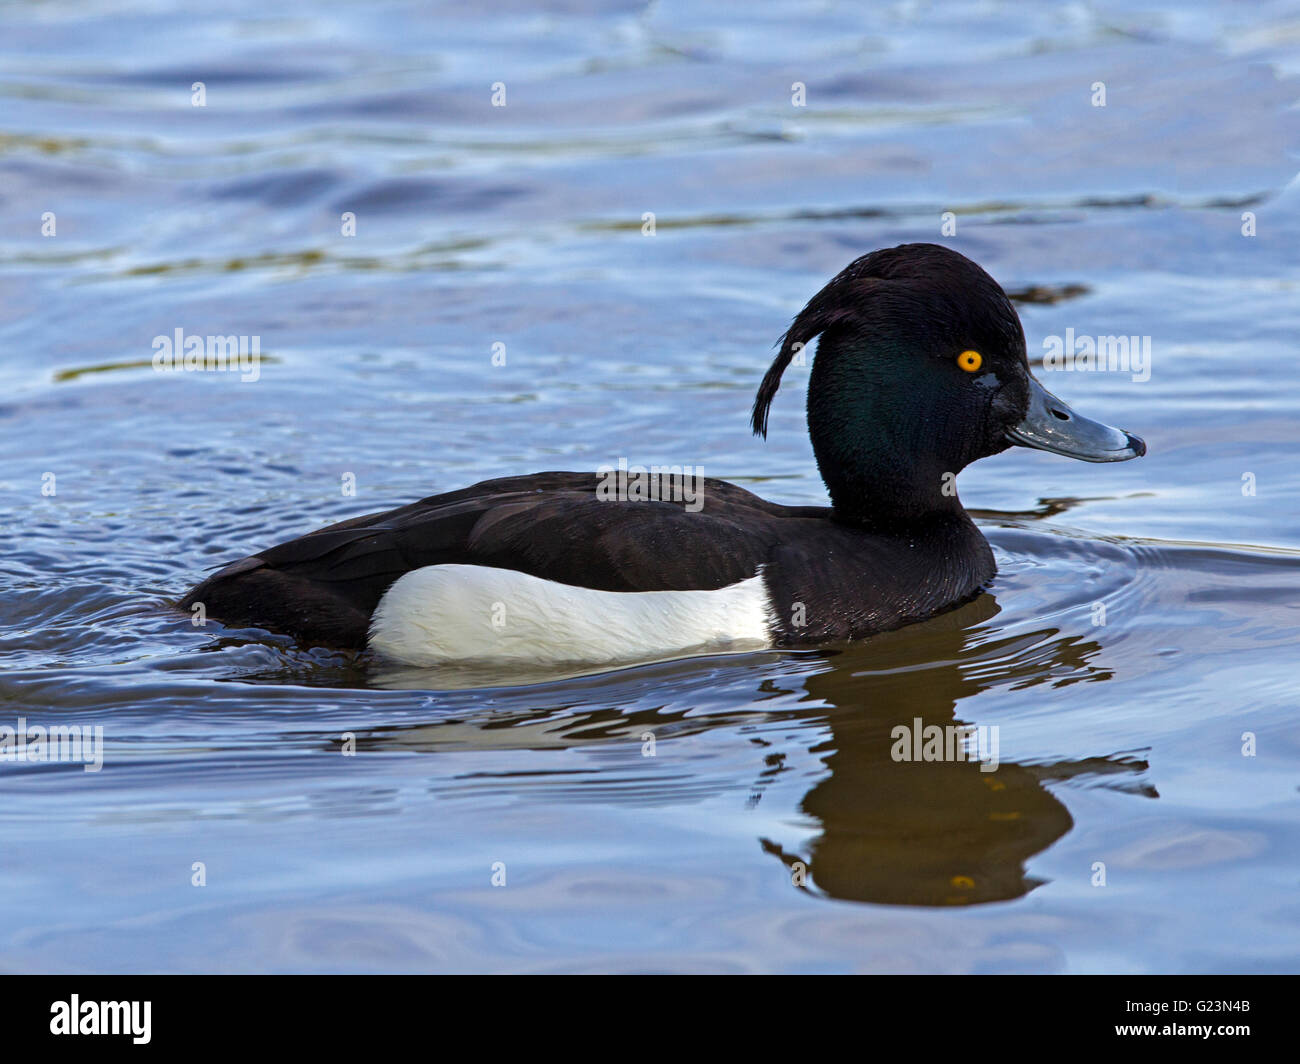 Male tufted duck swimming Stock Photo